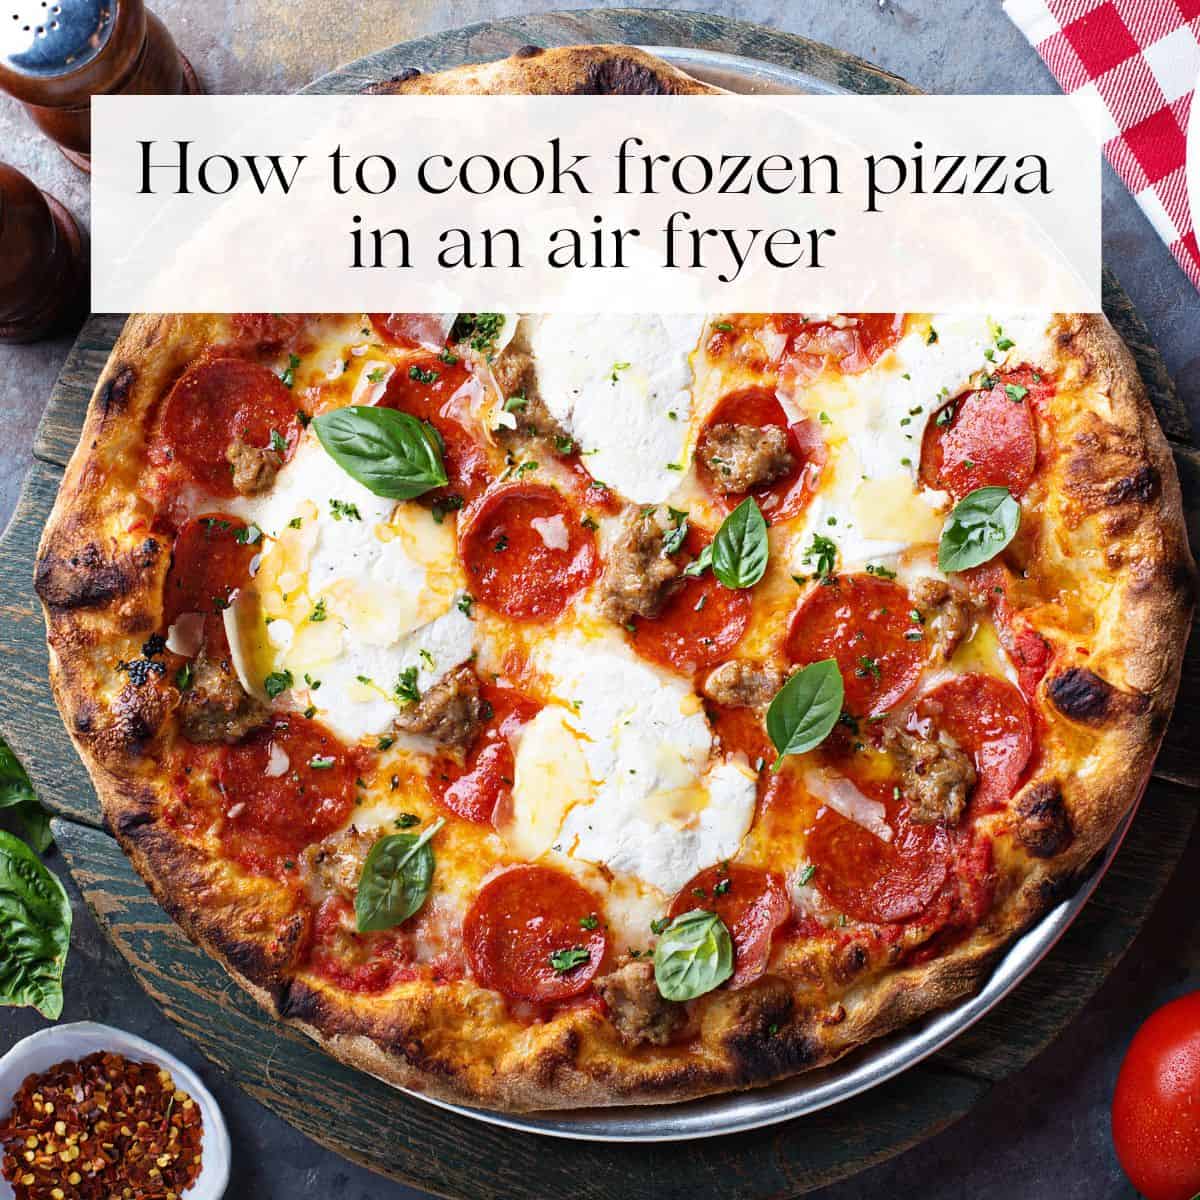 A cooked pizza topped with cheese, pepperoni slices and fresh basil with the title "how to cook frozen pizza in an air fryer" over it.